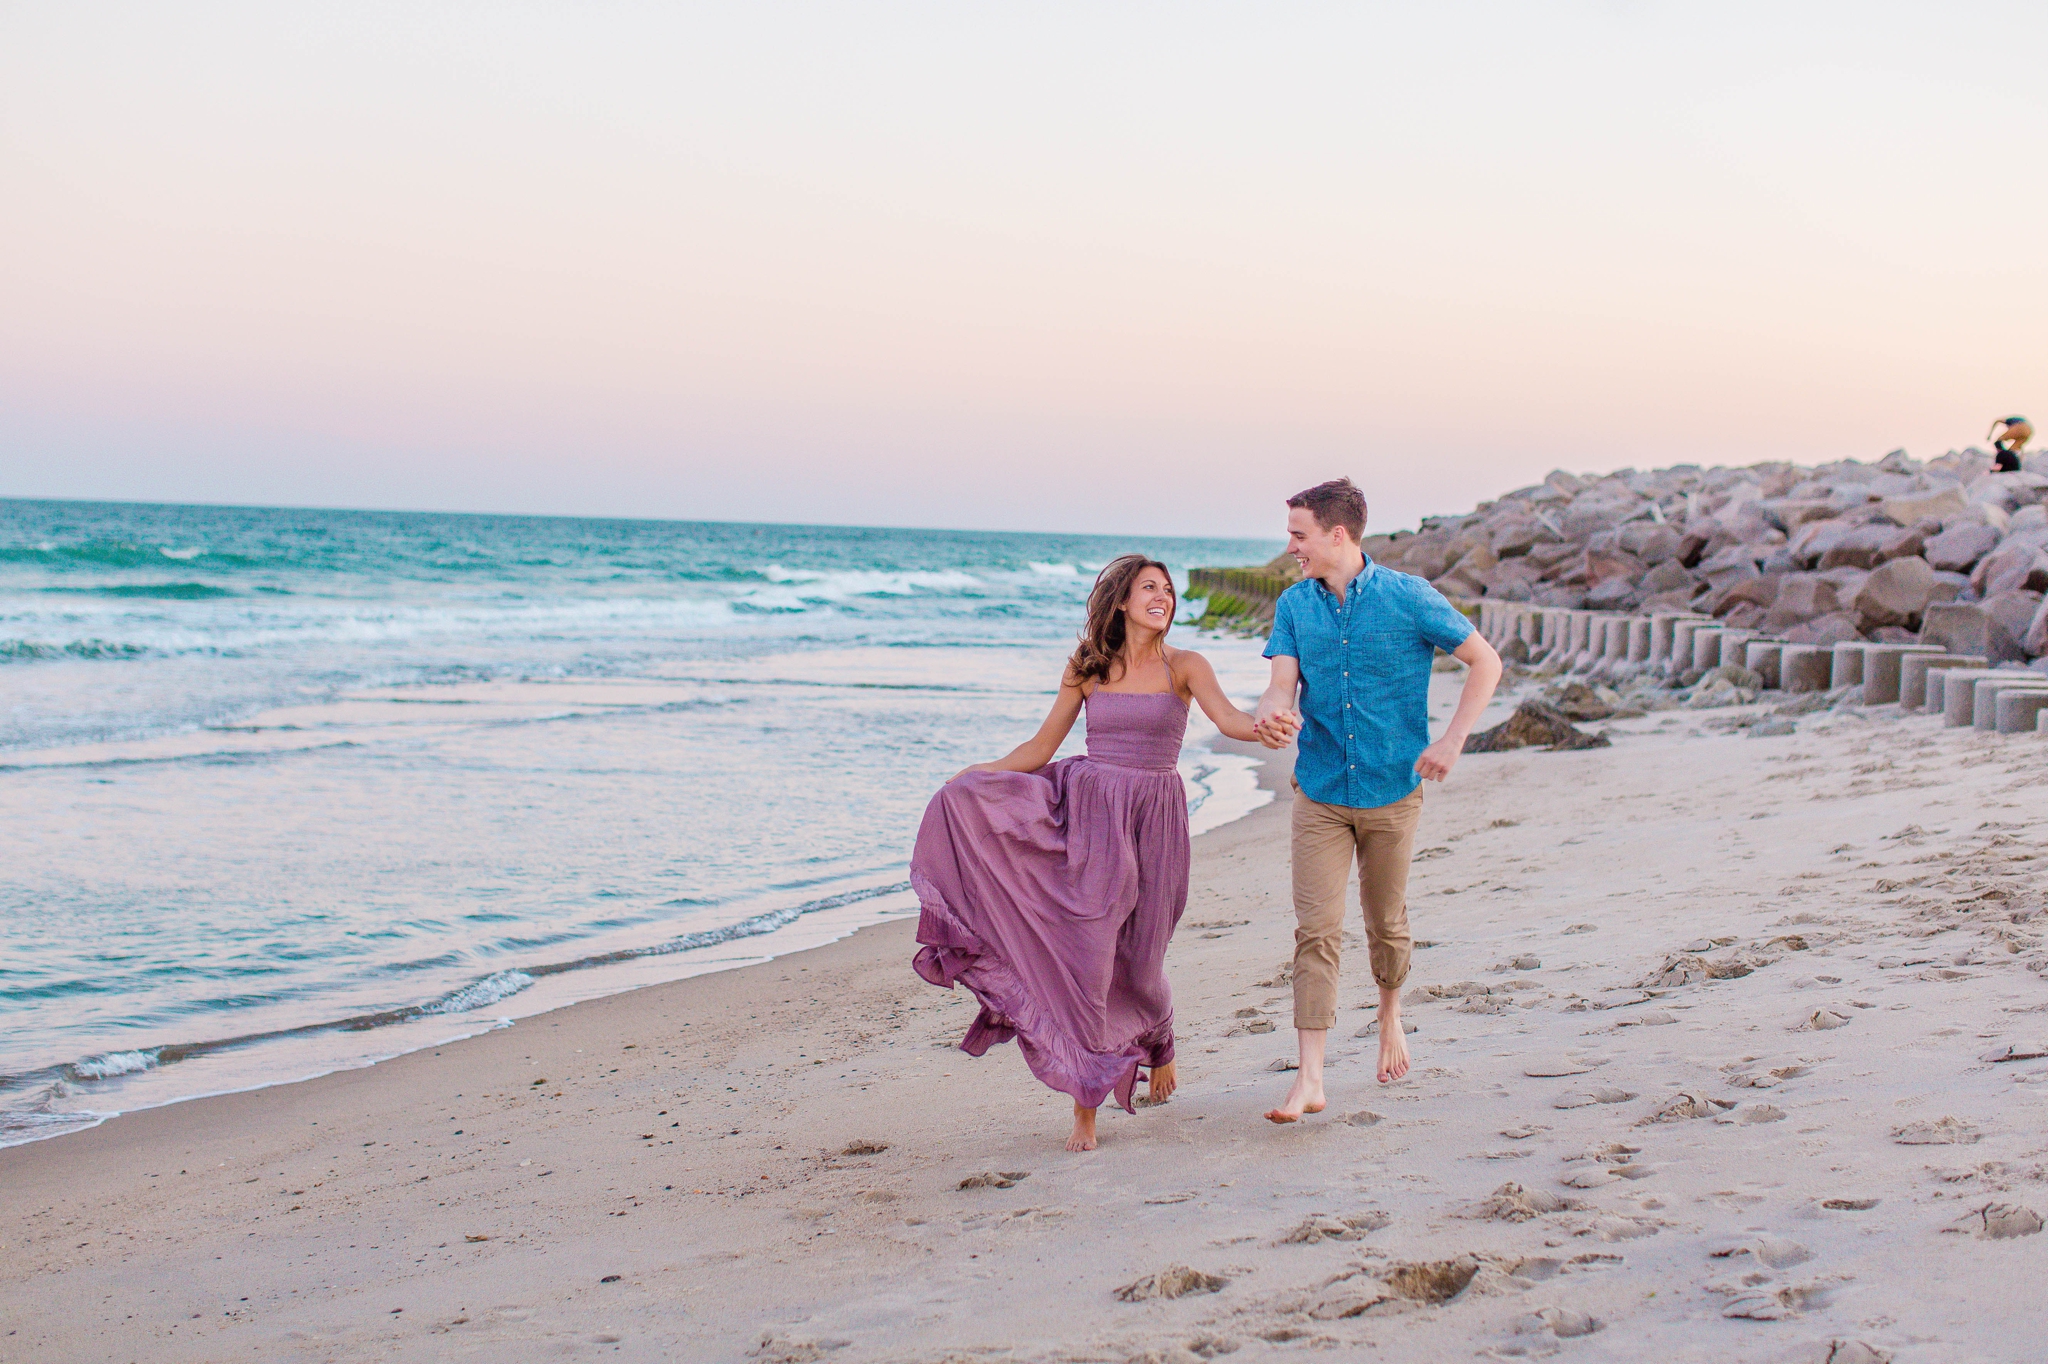  man and woman running in the sand - - Woman is in a flowy pastel maxi dress - candid and unposed golden light session - beach engagement photographer in honolulu, oahu, hawaii - johanna dye photography 